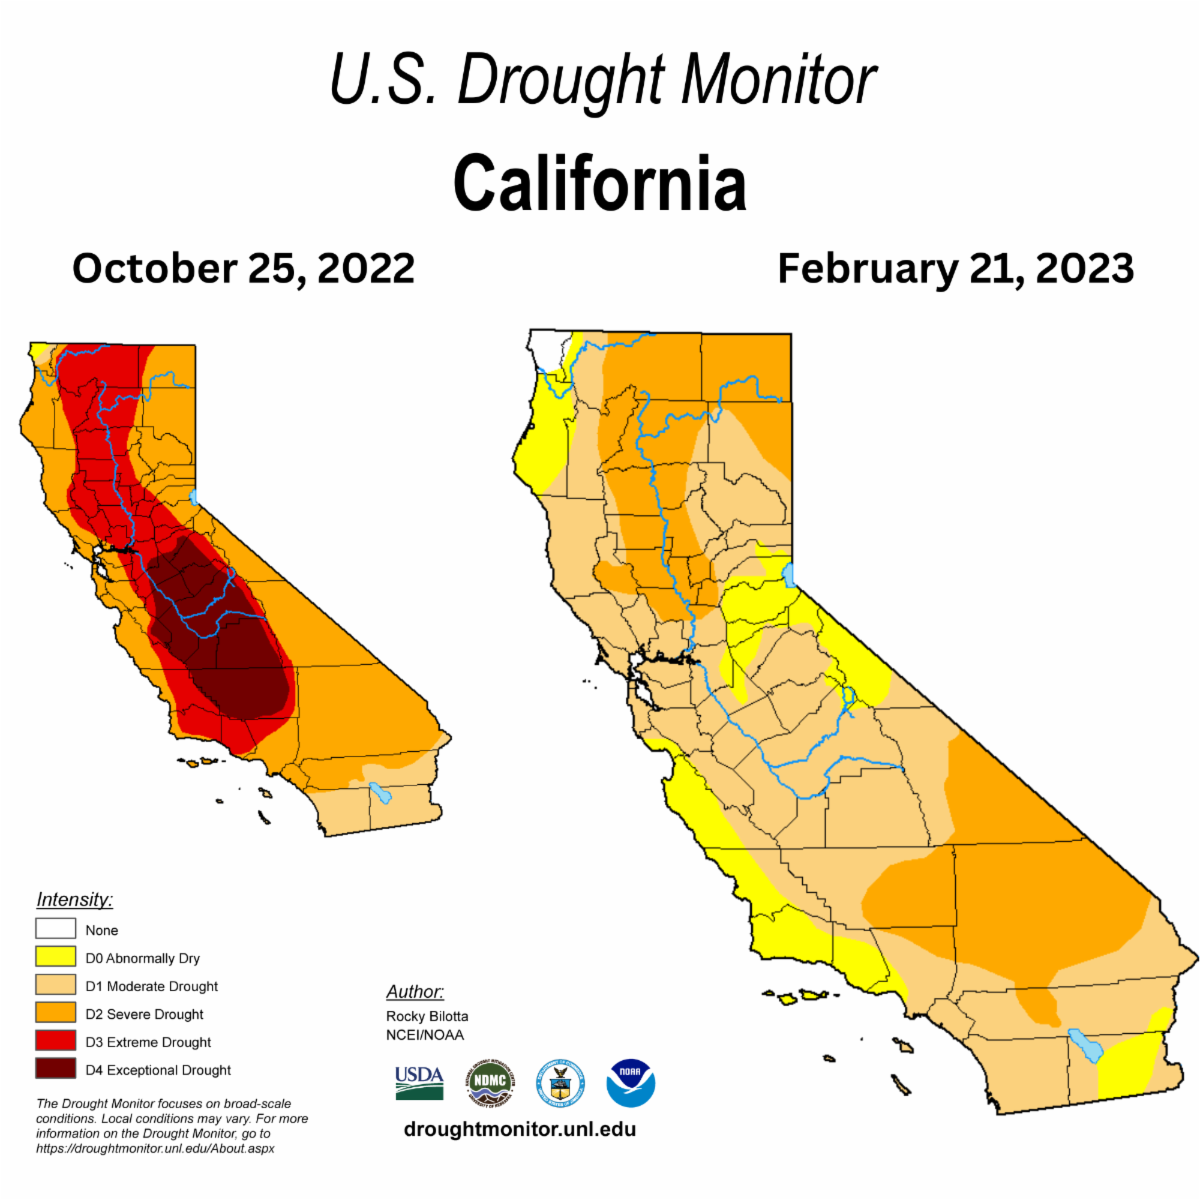 Drought Monitor Image 2022 Compared to 2023 _Feb_